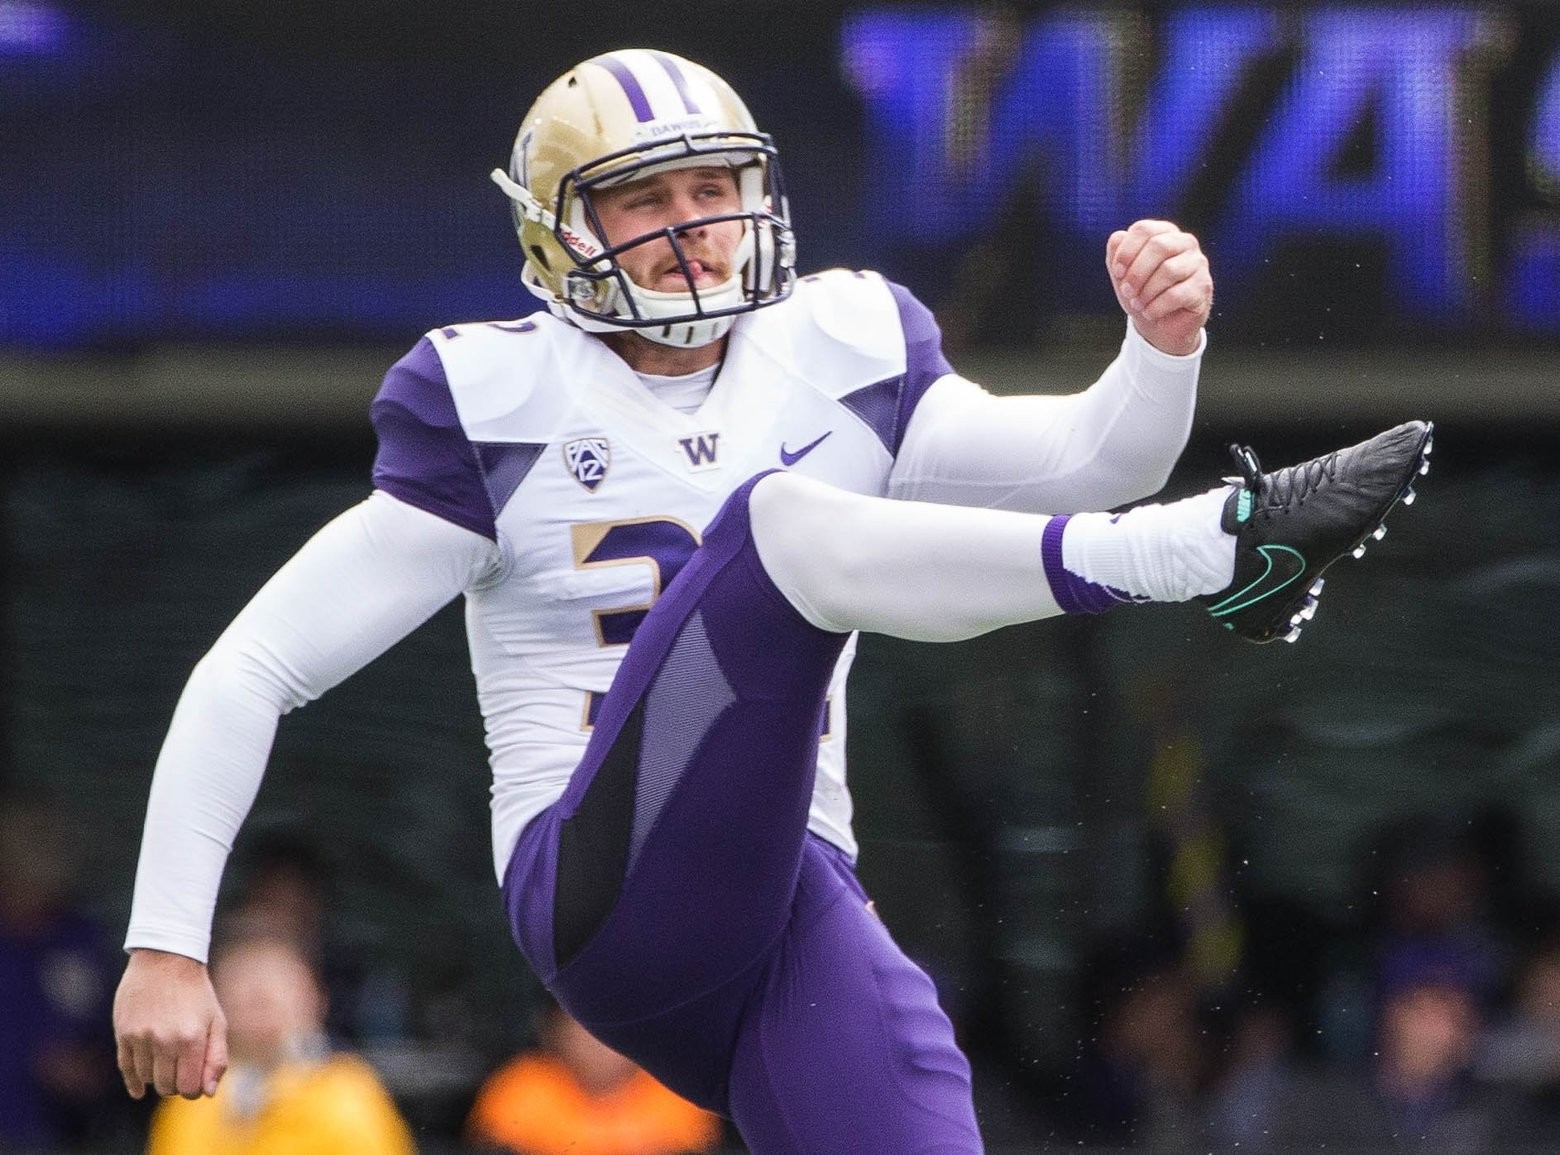 UW spring football preview Kicking game remains a major question mark